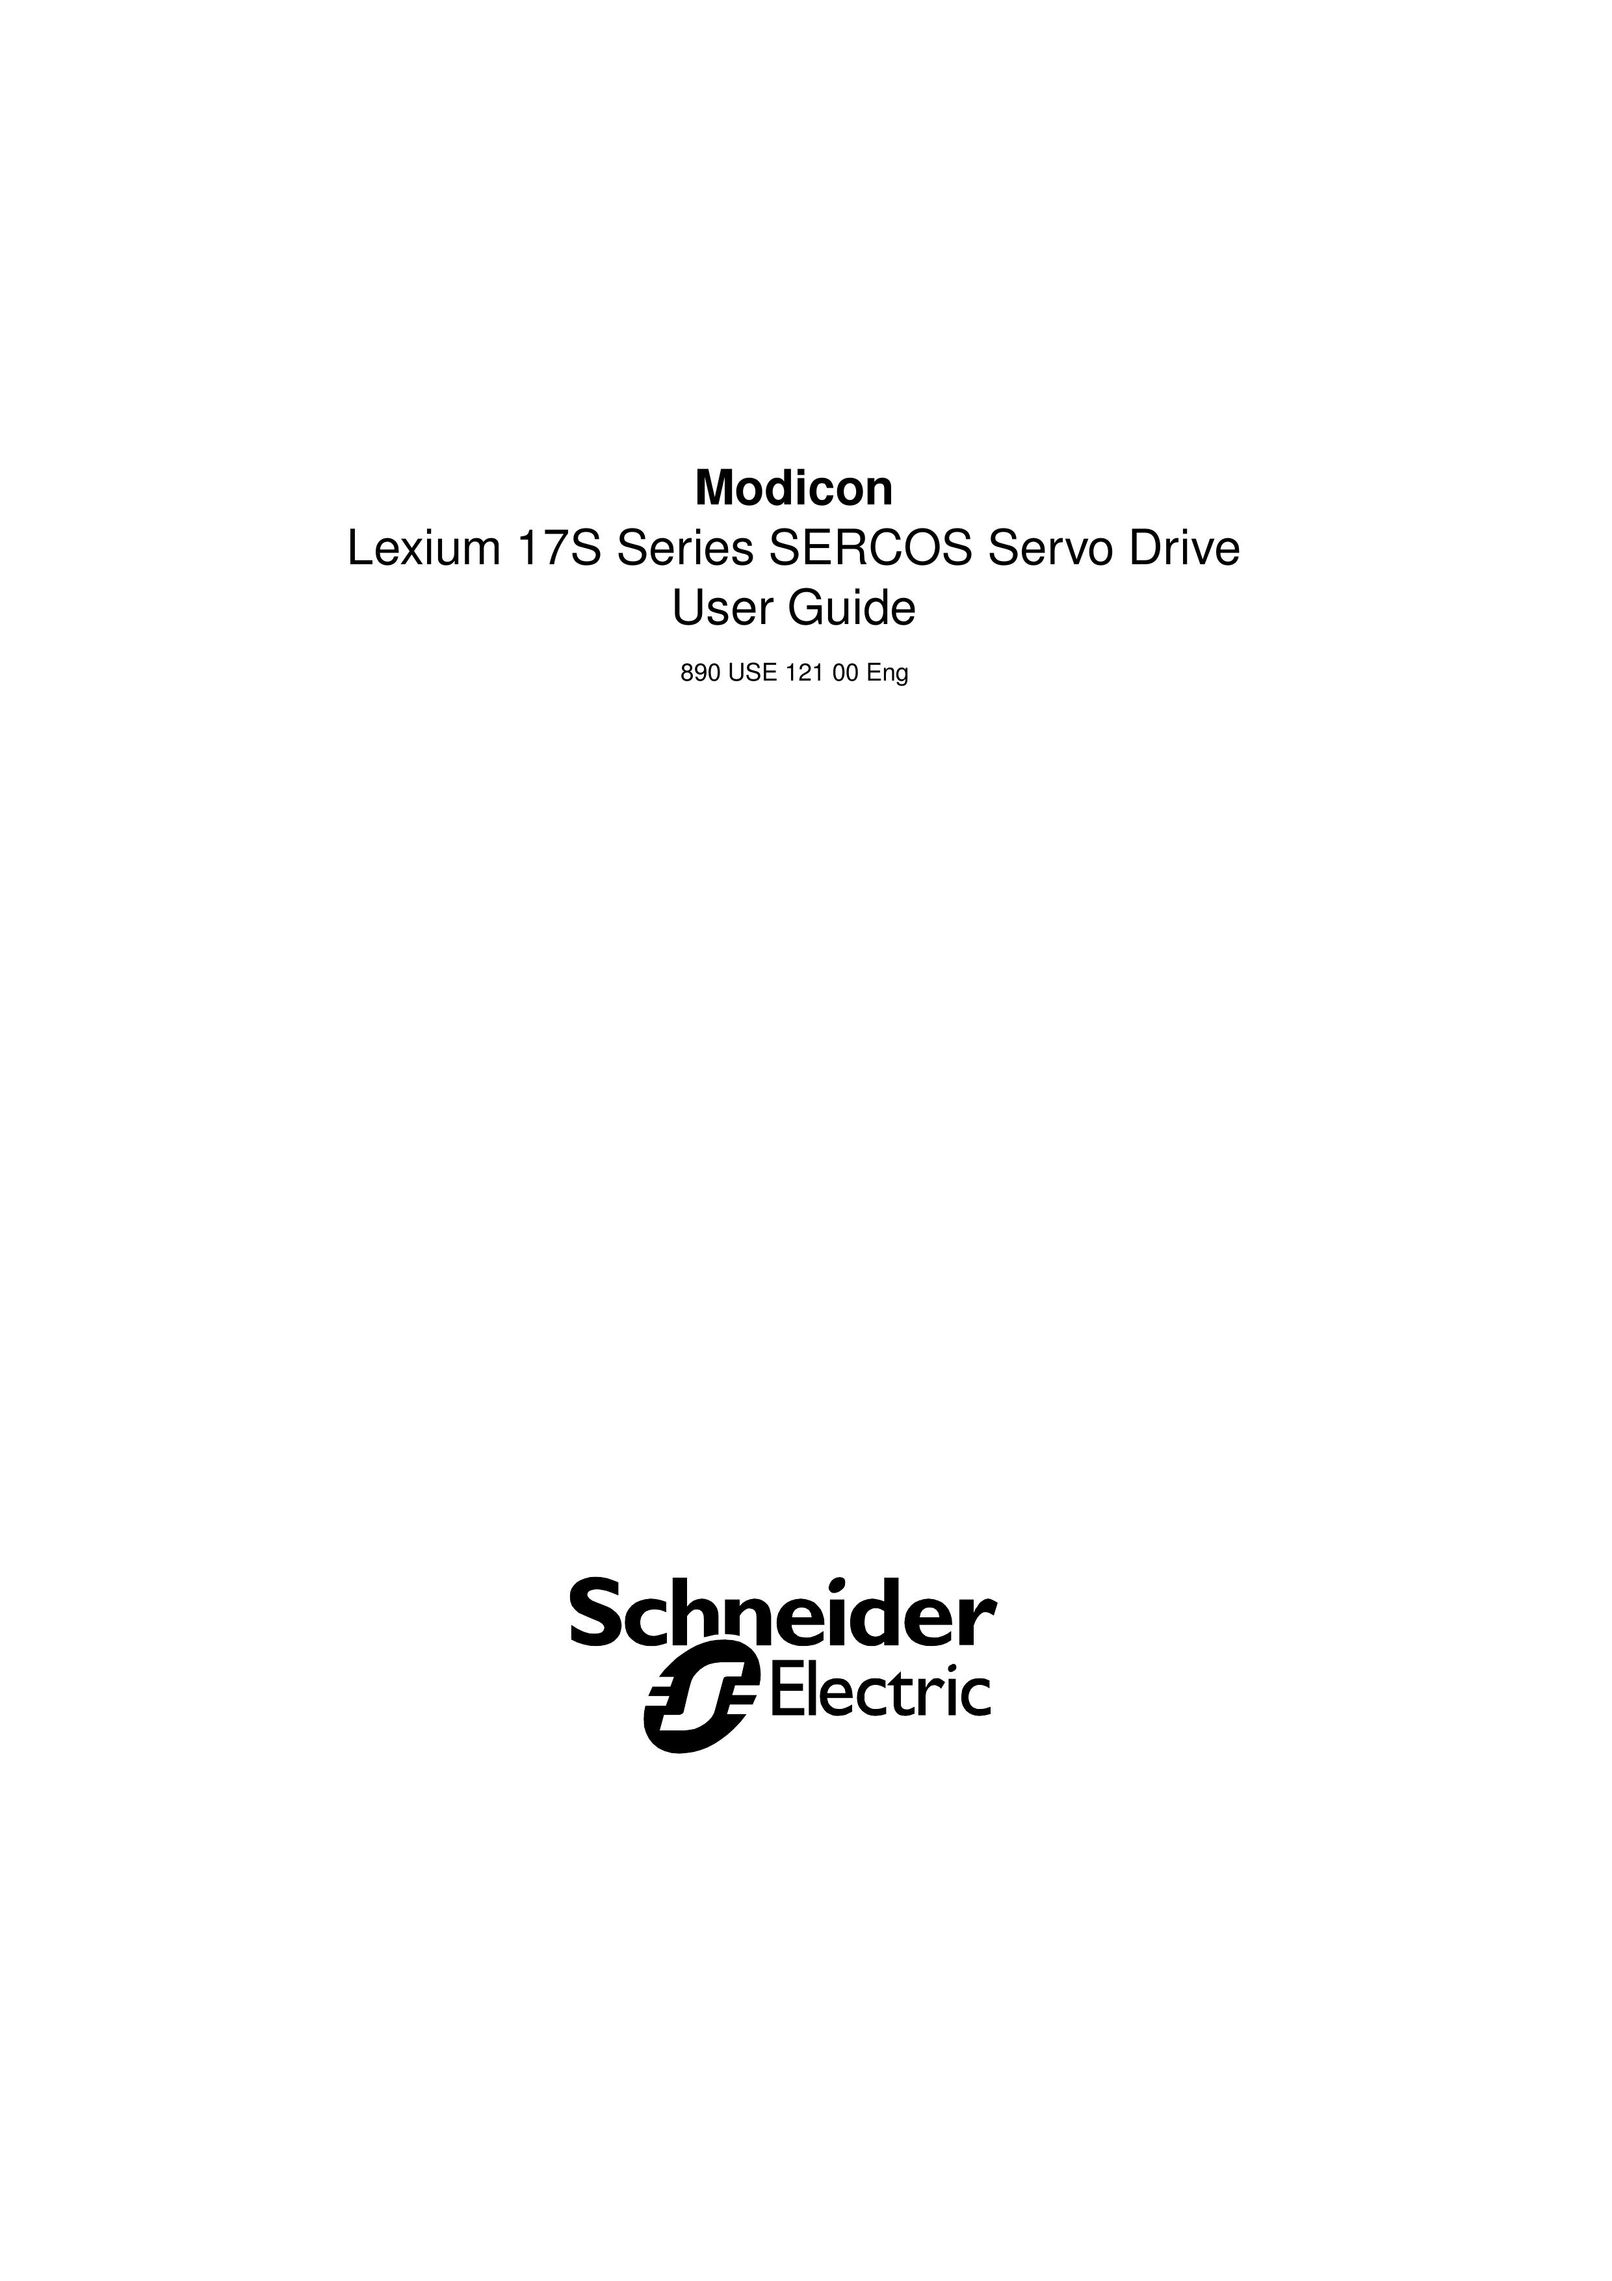 Schneider Electric 17S Series Network Router User Manual